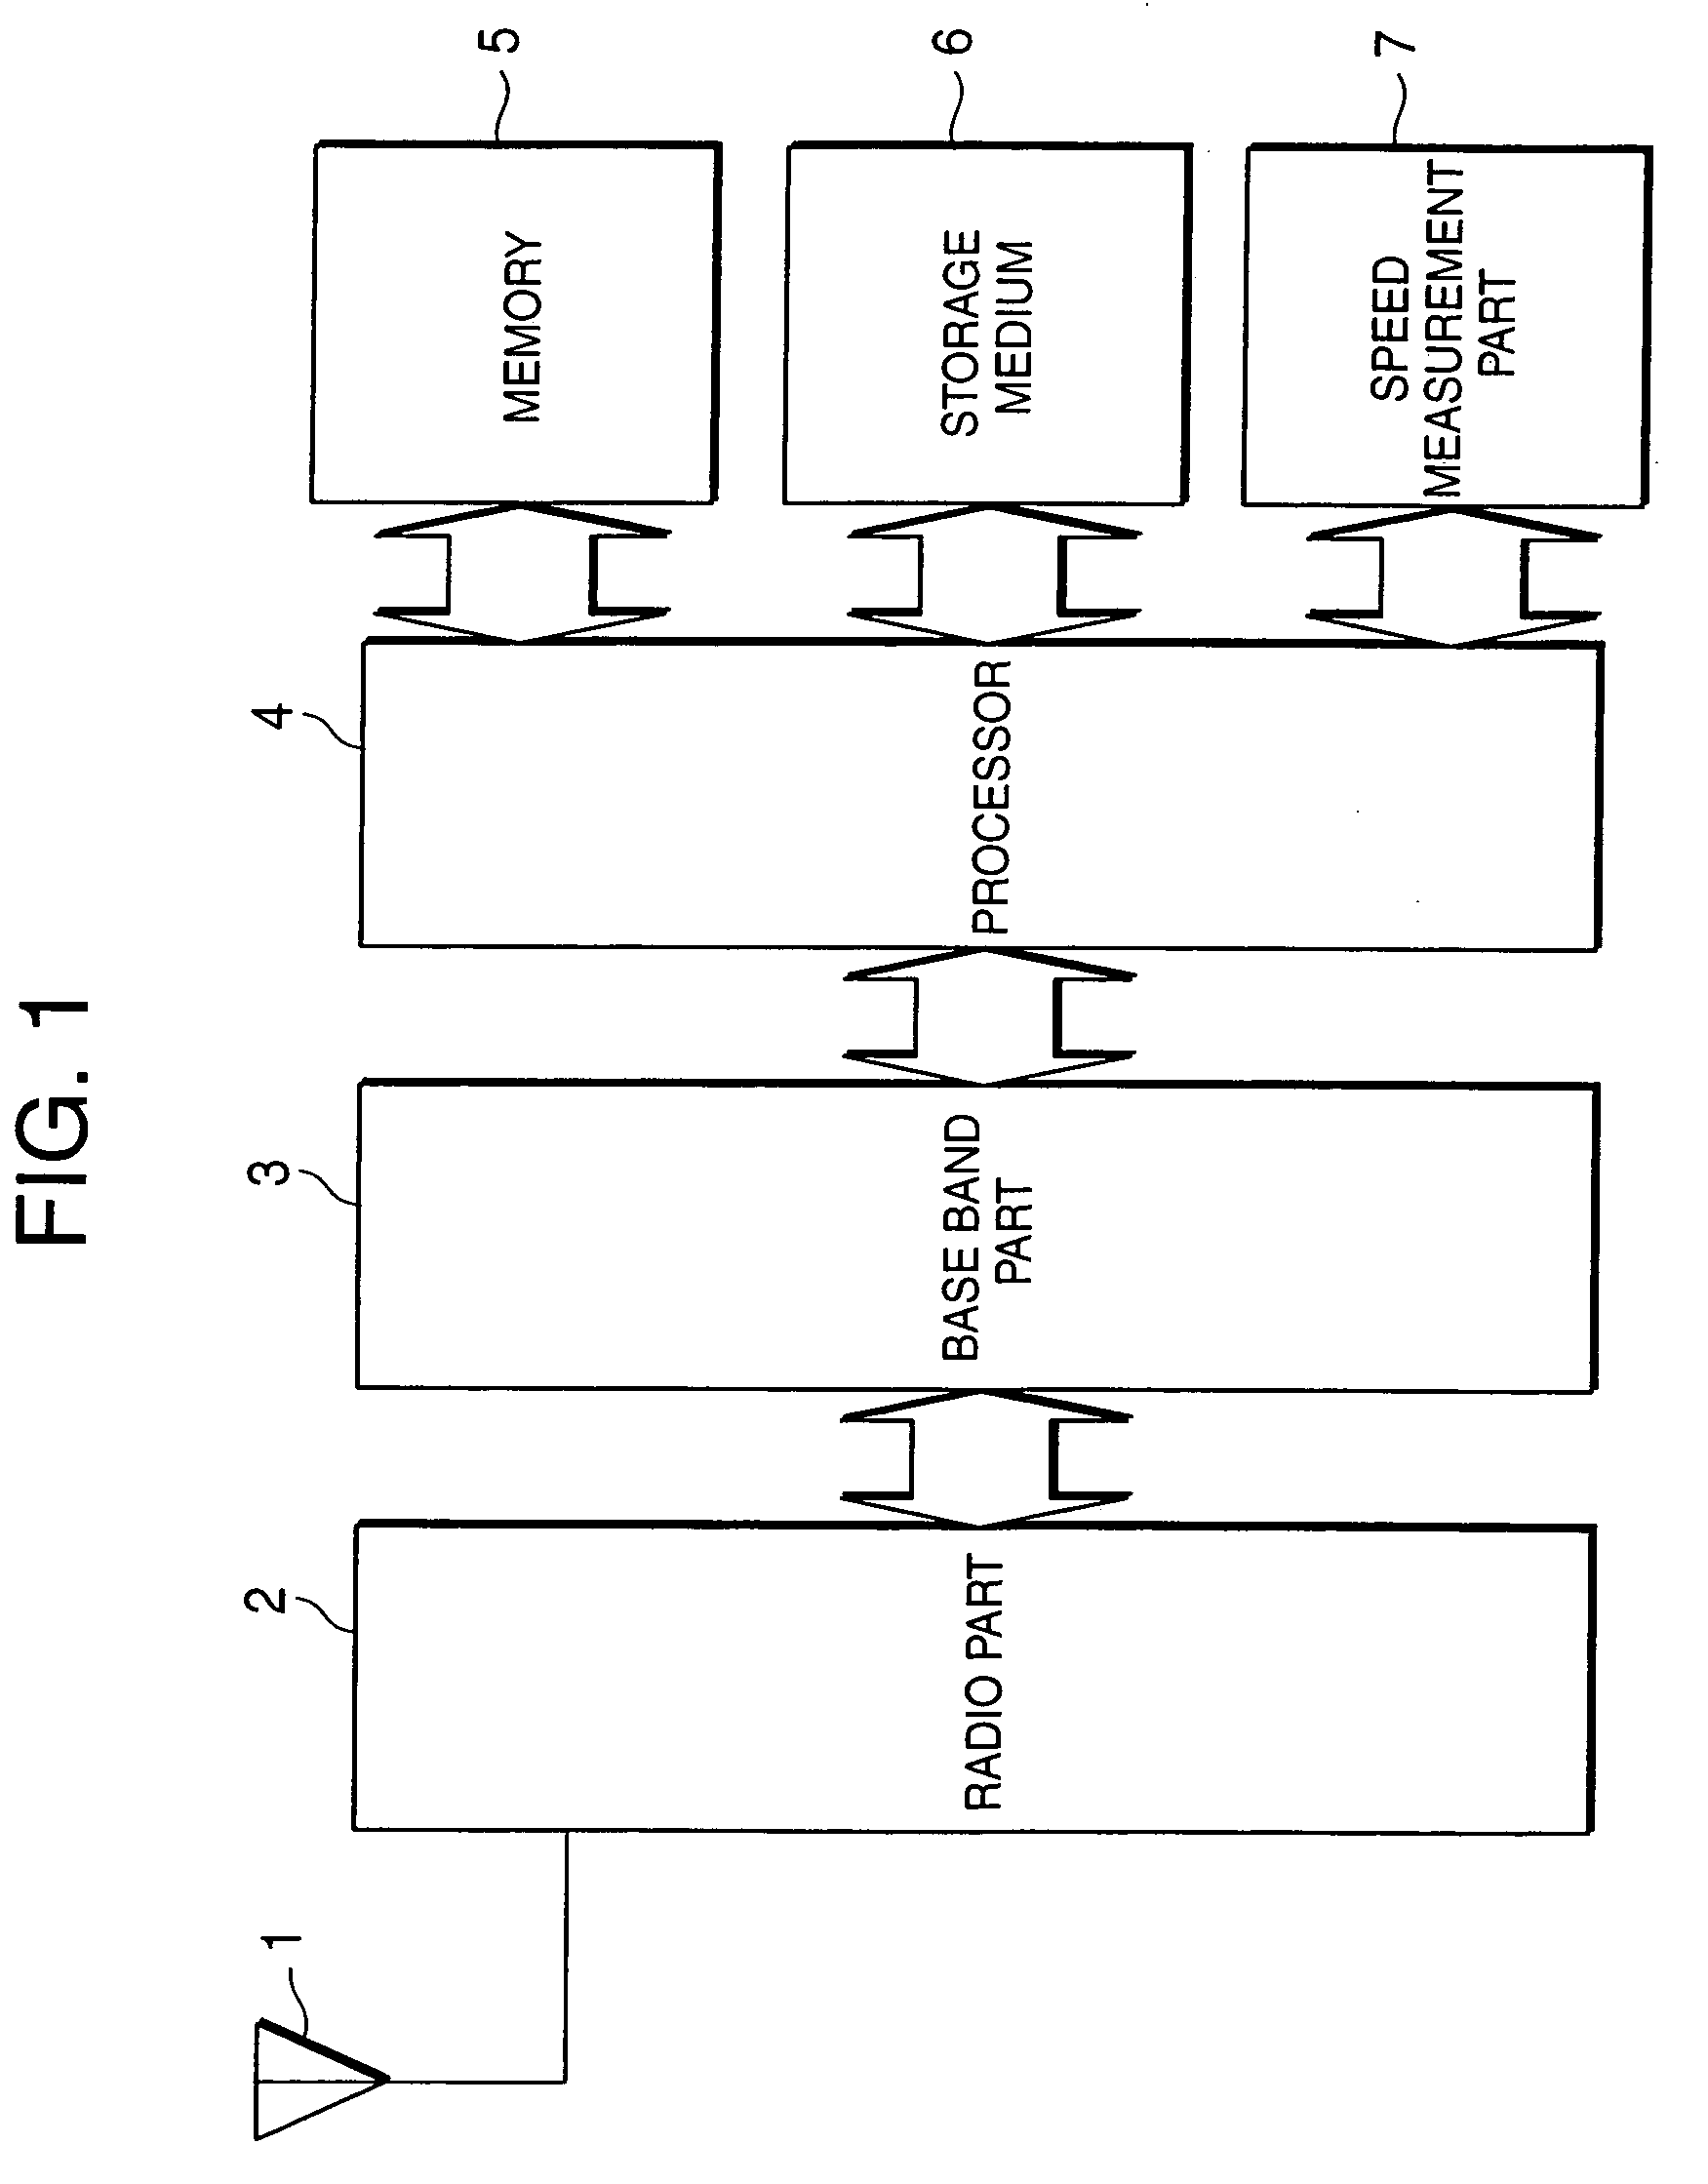 Transmitting electric power control method in the CDMA system